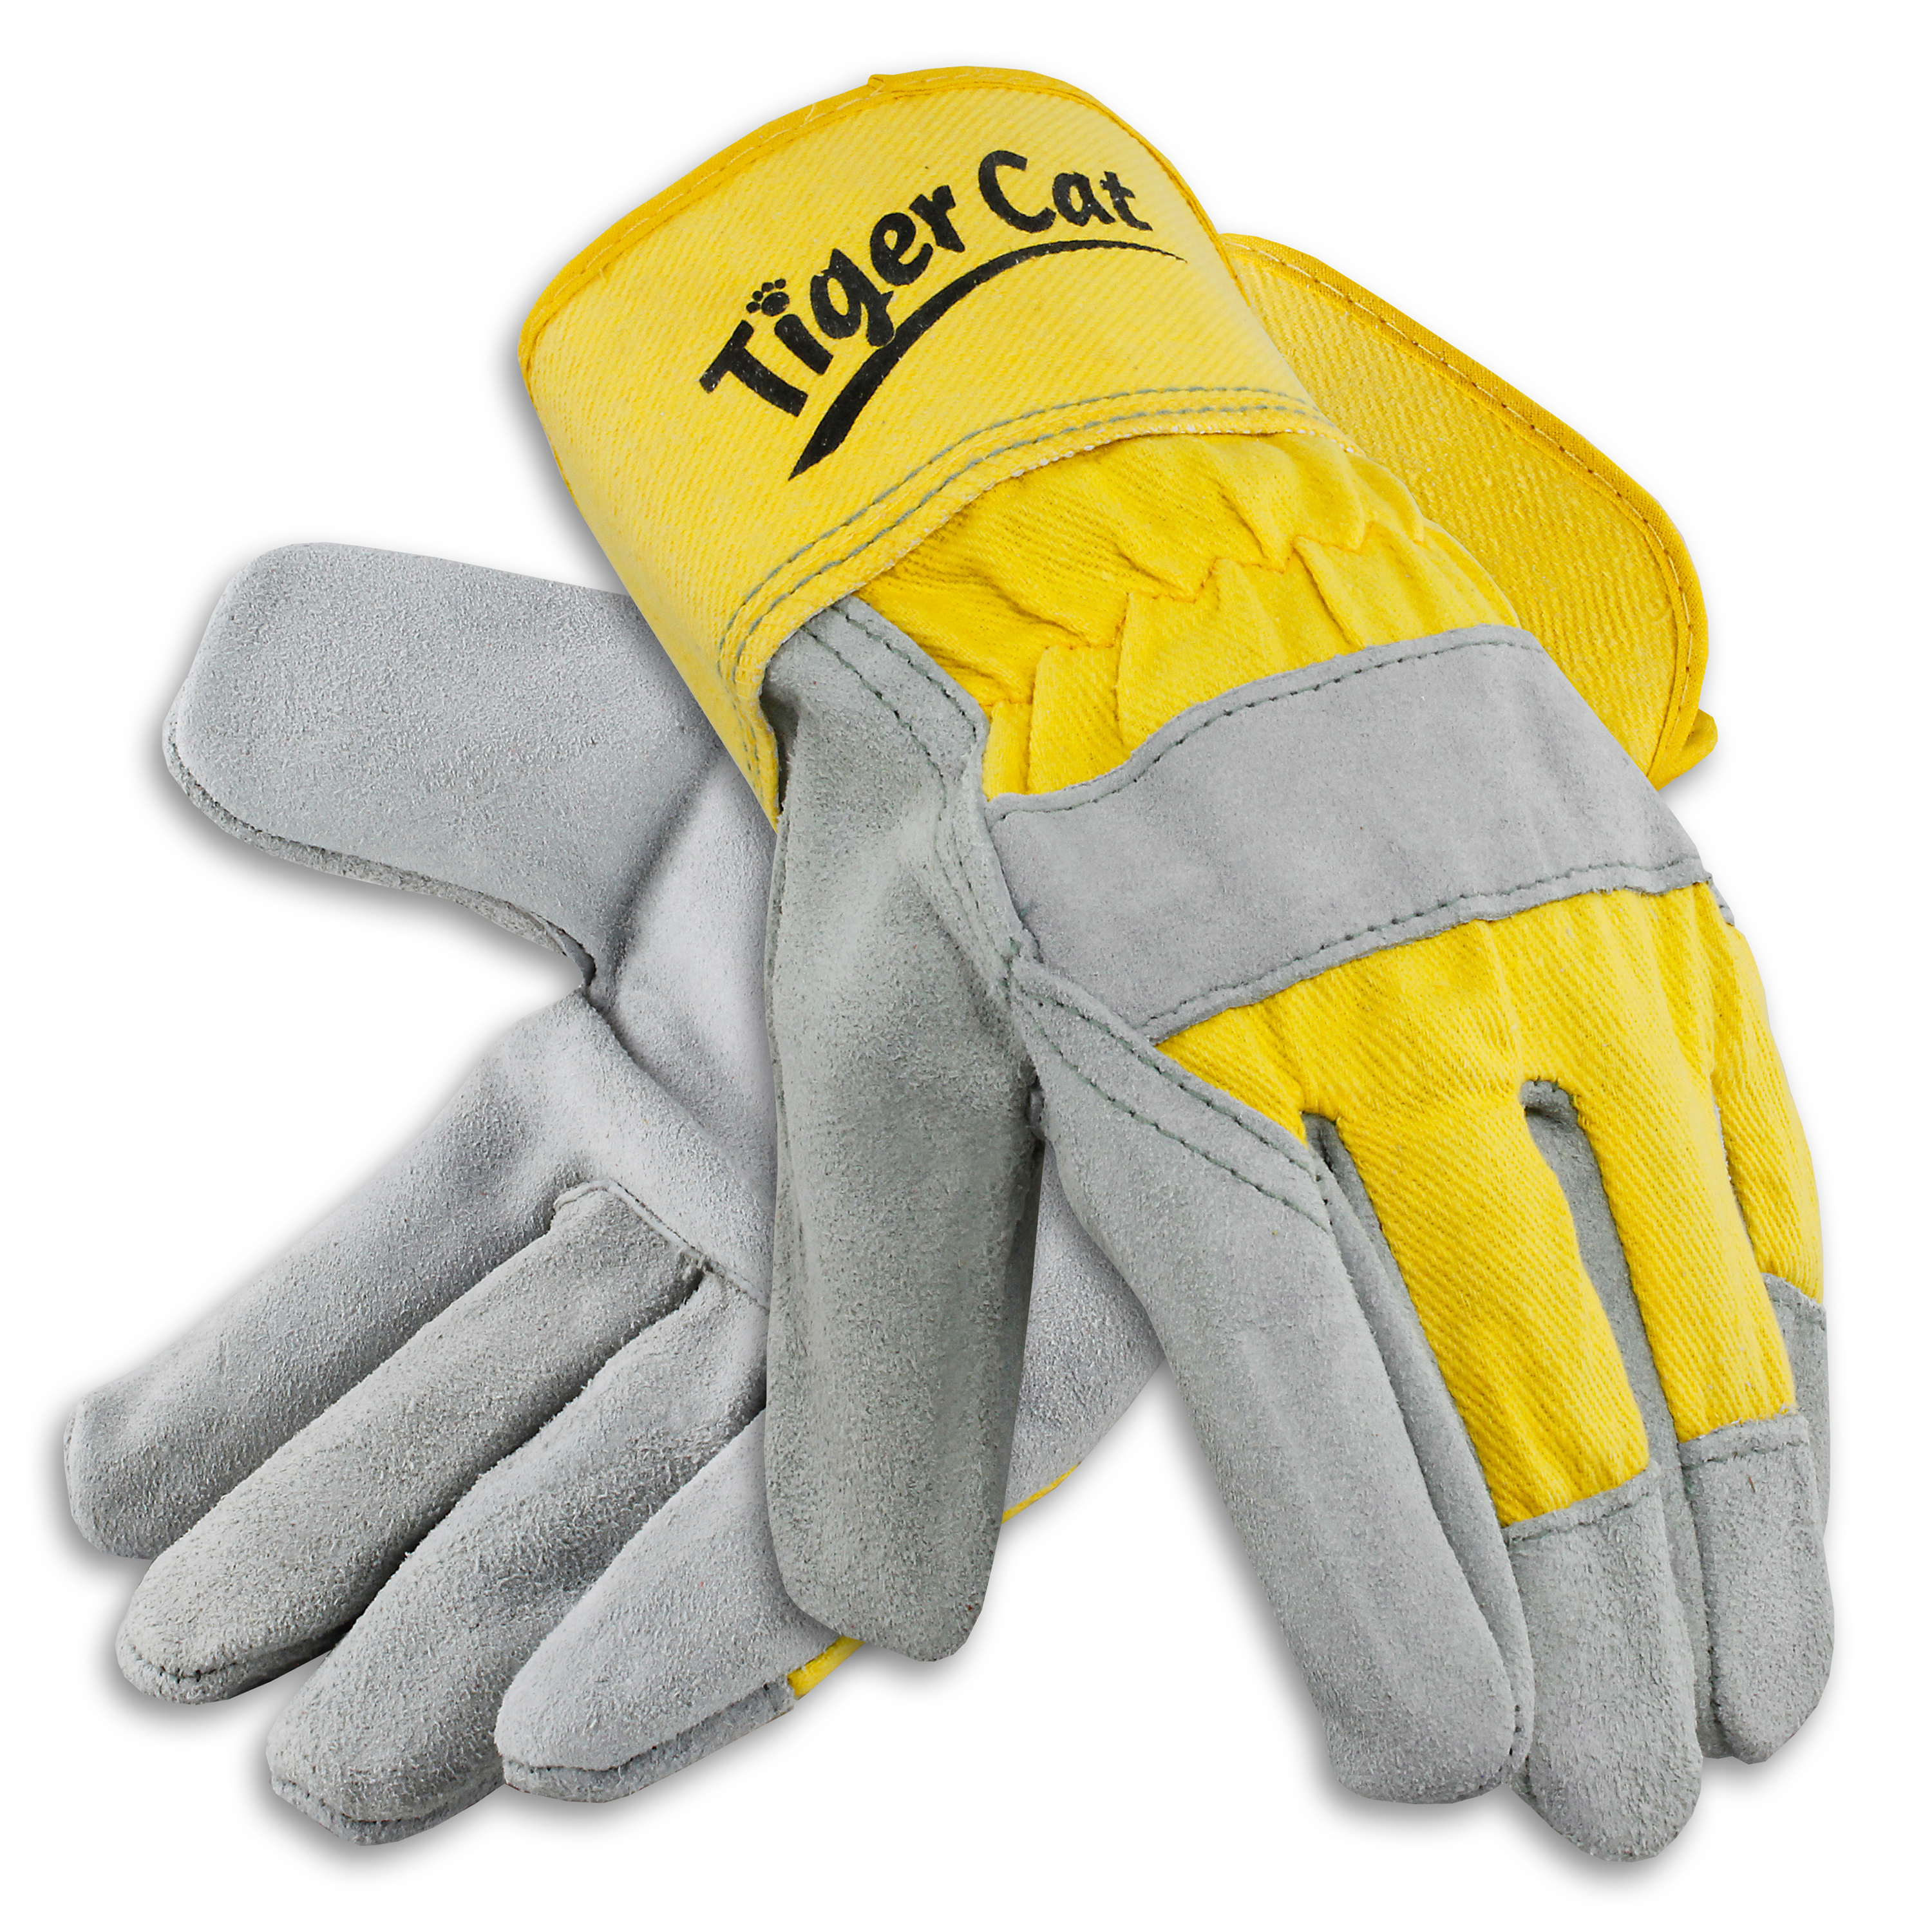 Tiger Cat&trade; Premium Leather Palm Gloves, Safety Cuff, 1 Pair